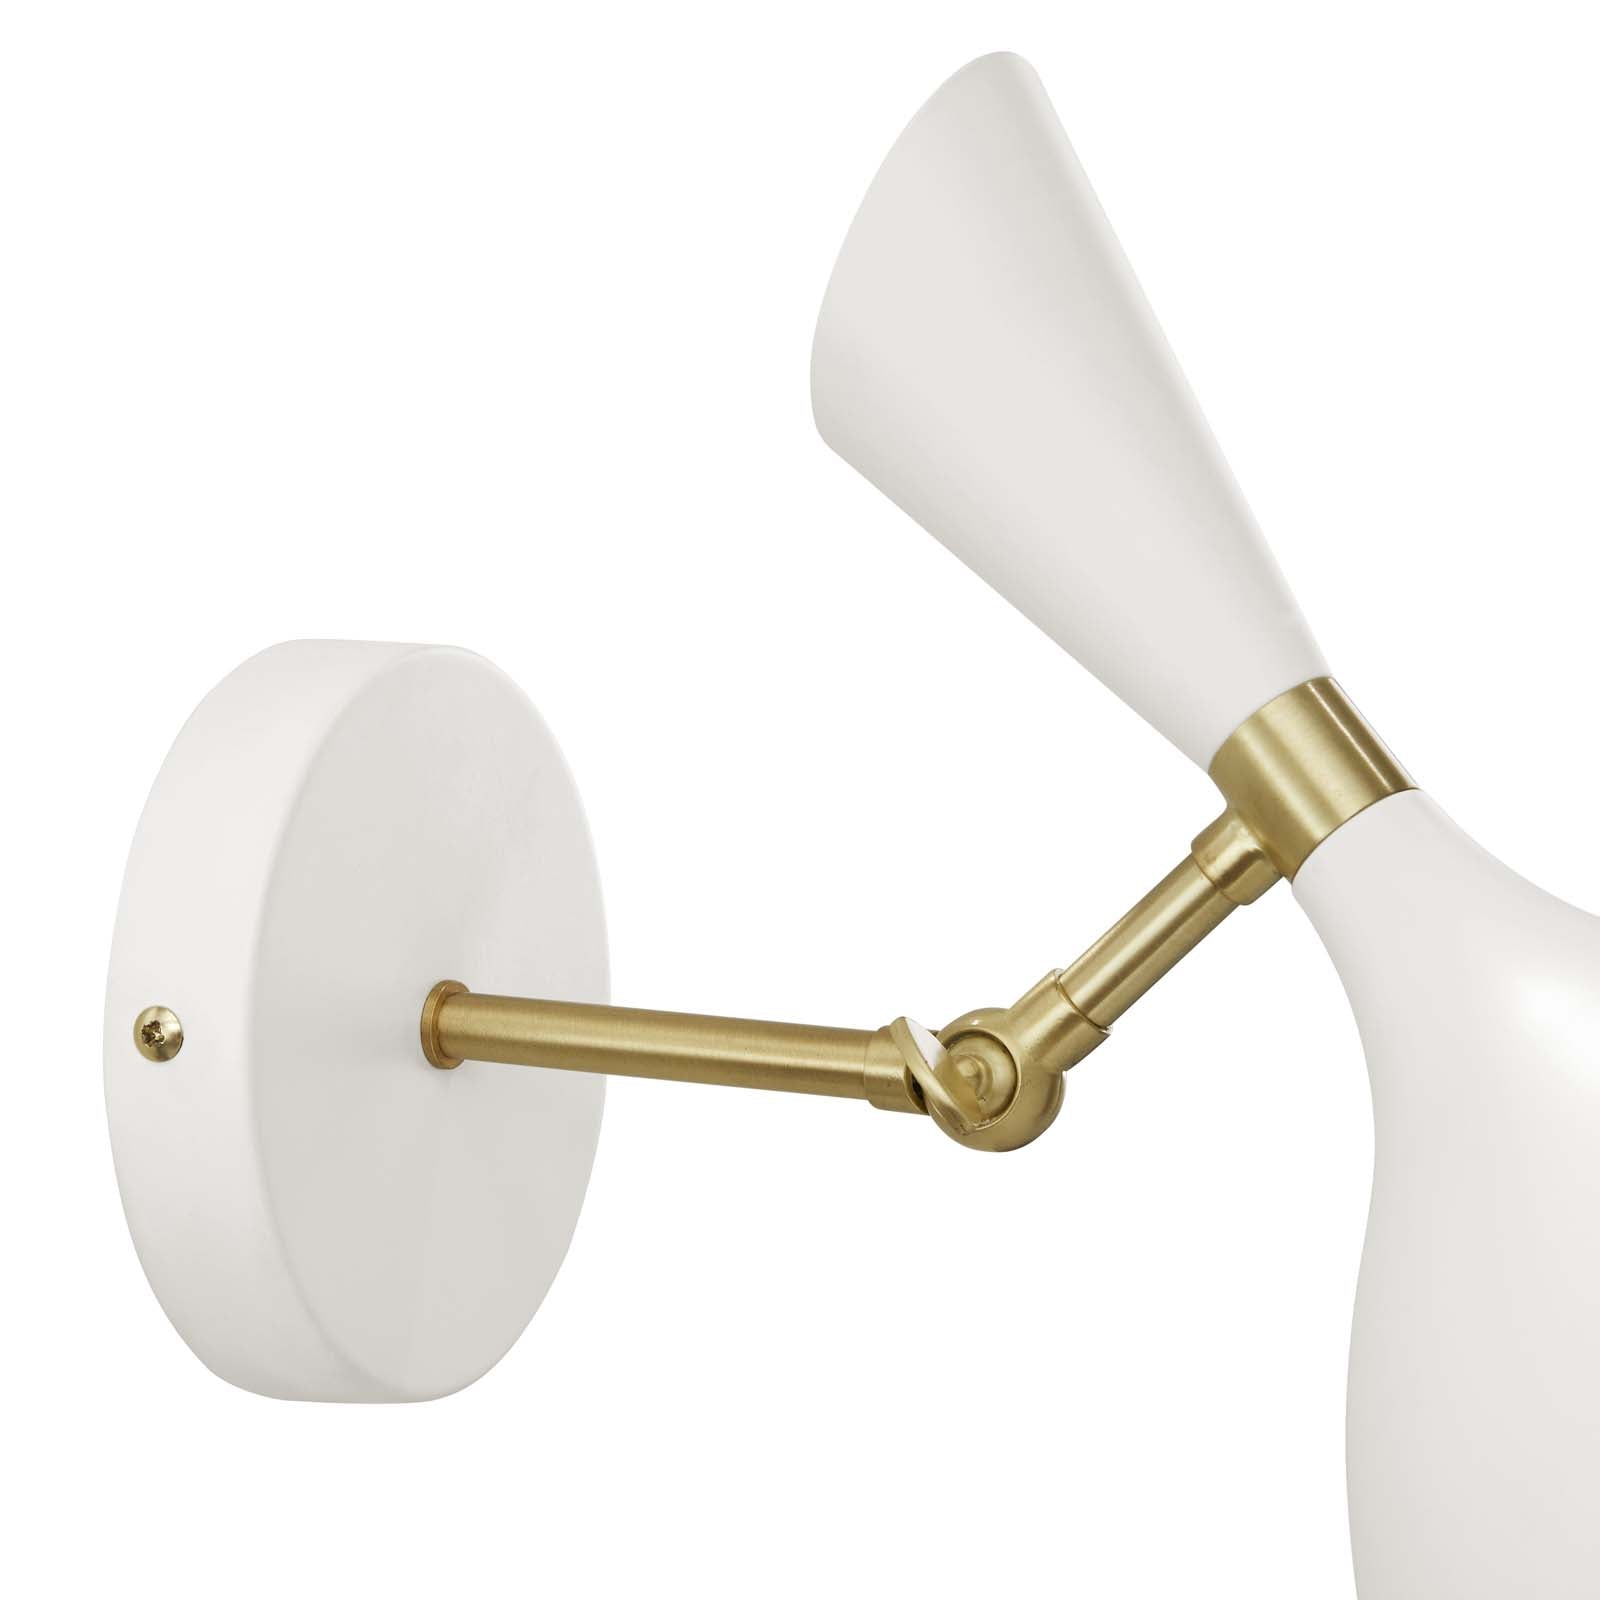 Declare Adjustable Wall Sconce By Modway - EEI-5309 | Ceiling Lamps | Modway - 19